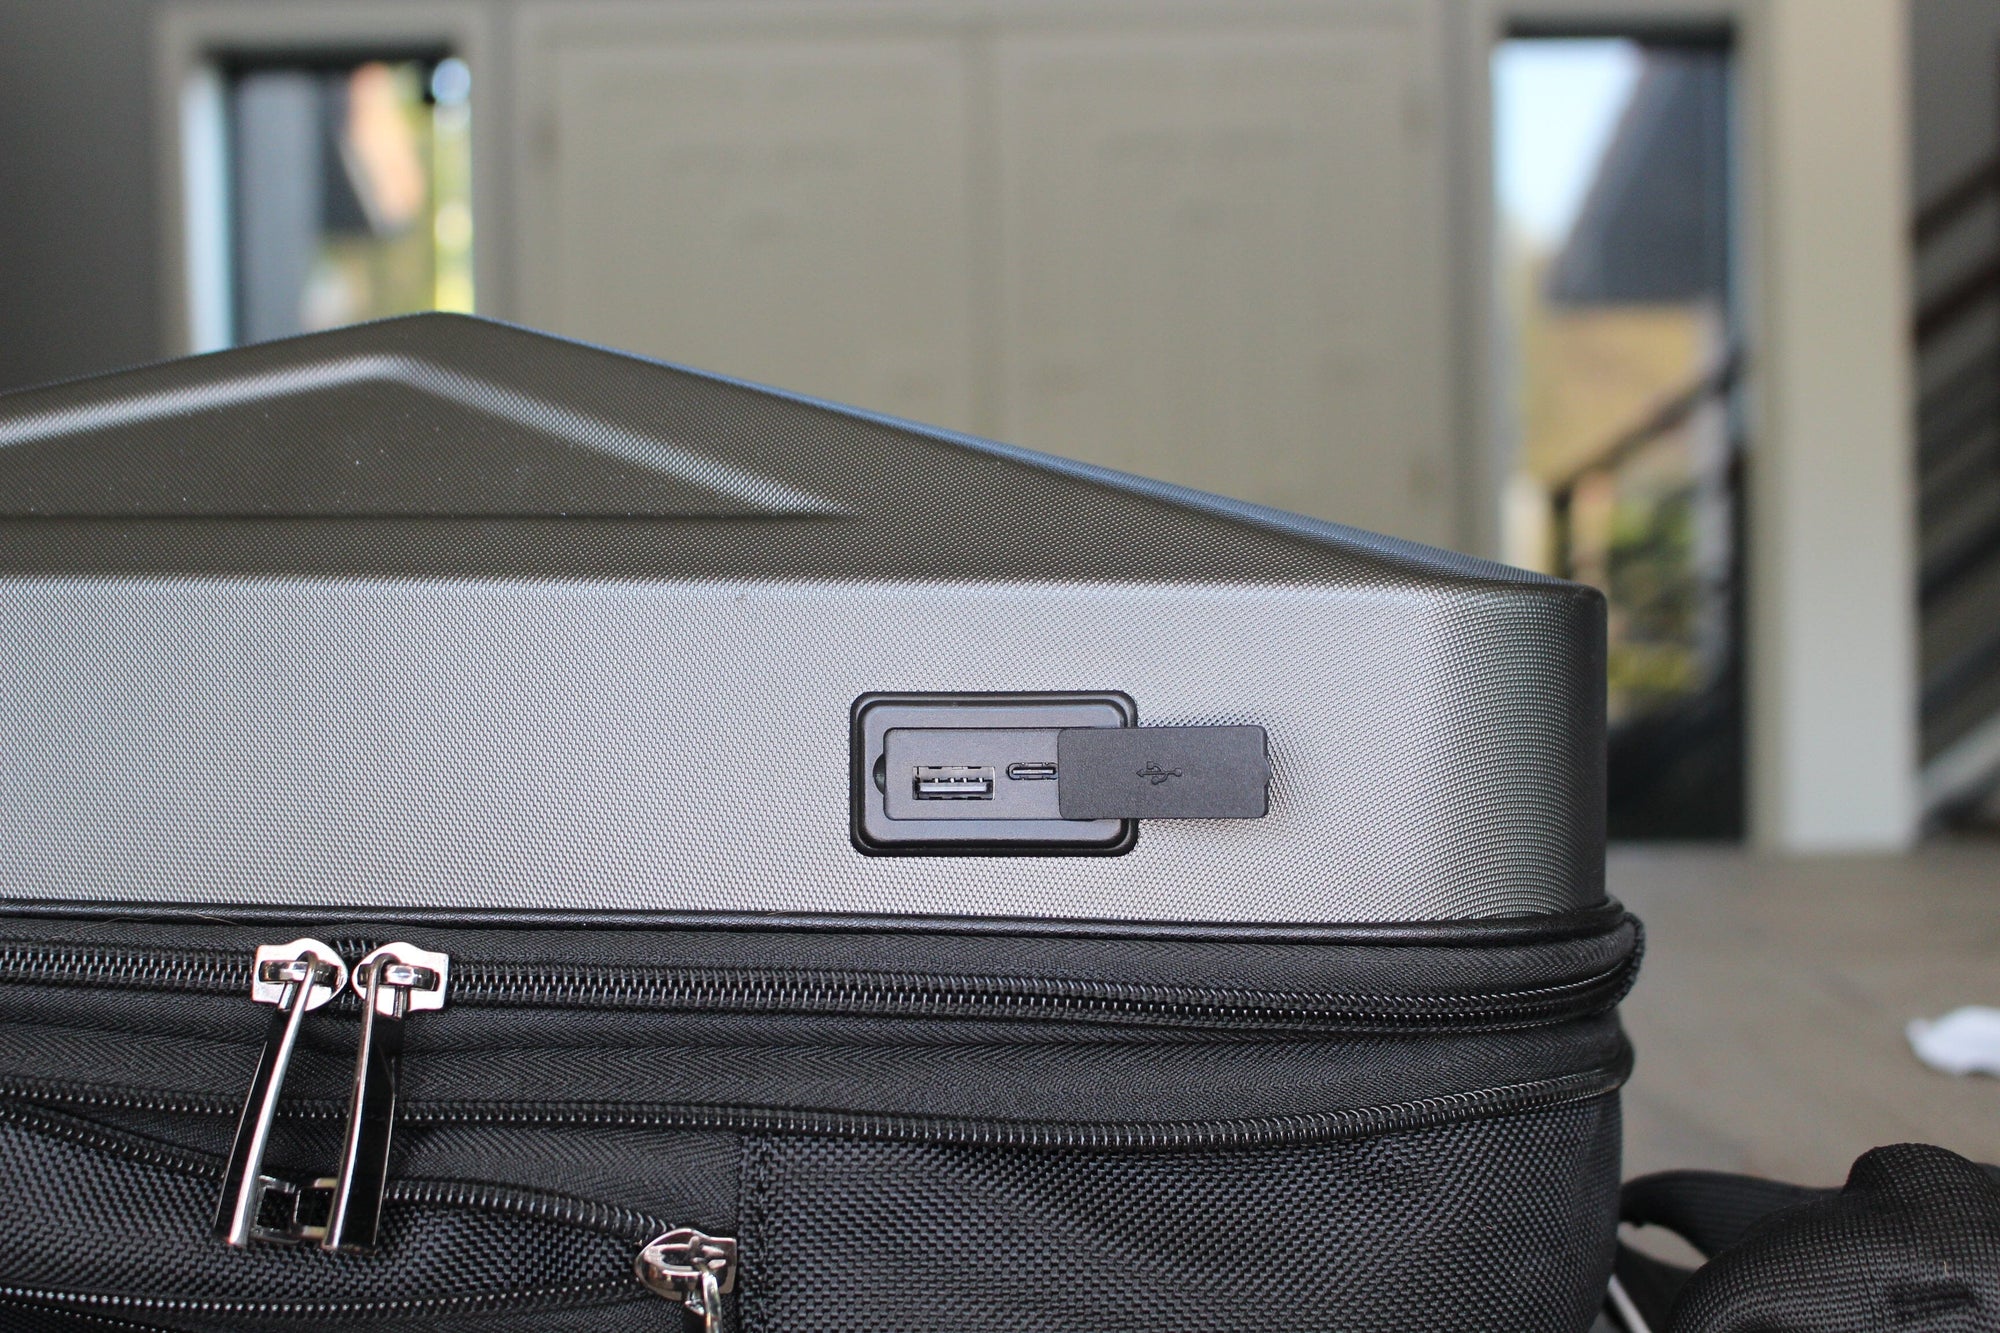 How Do Backpacks with USB Charging Ports Work?